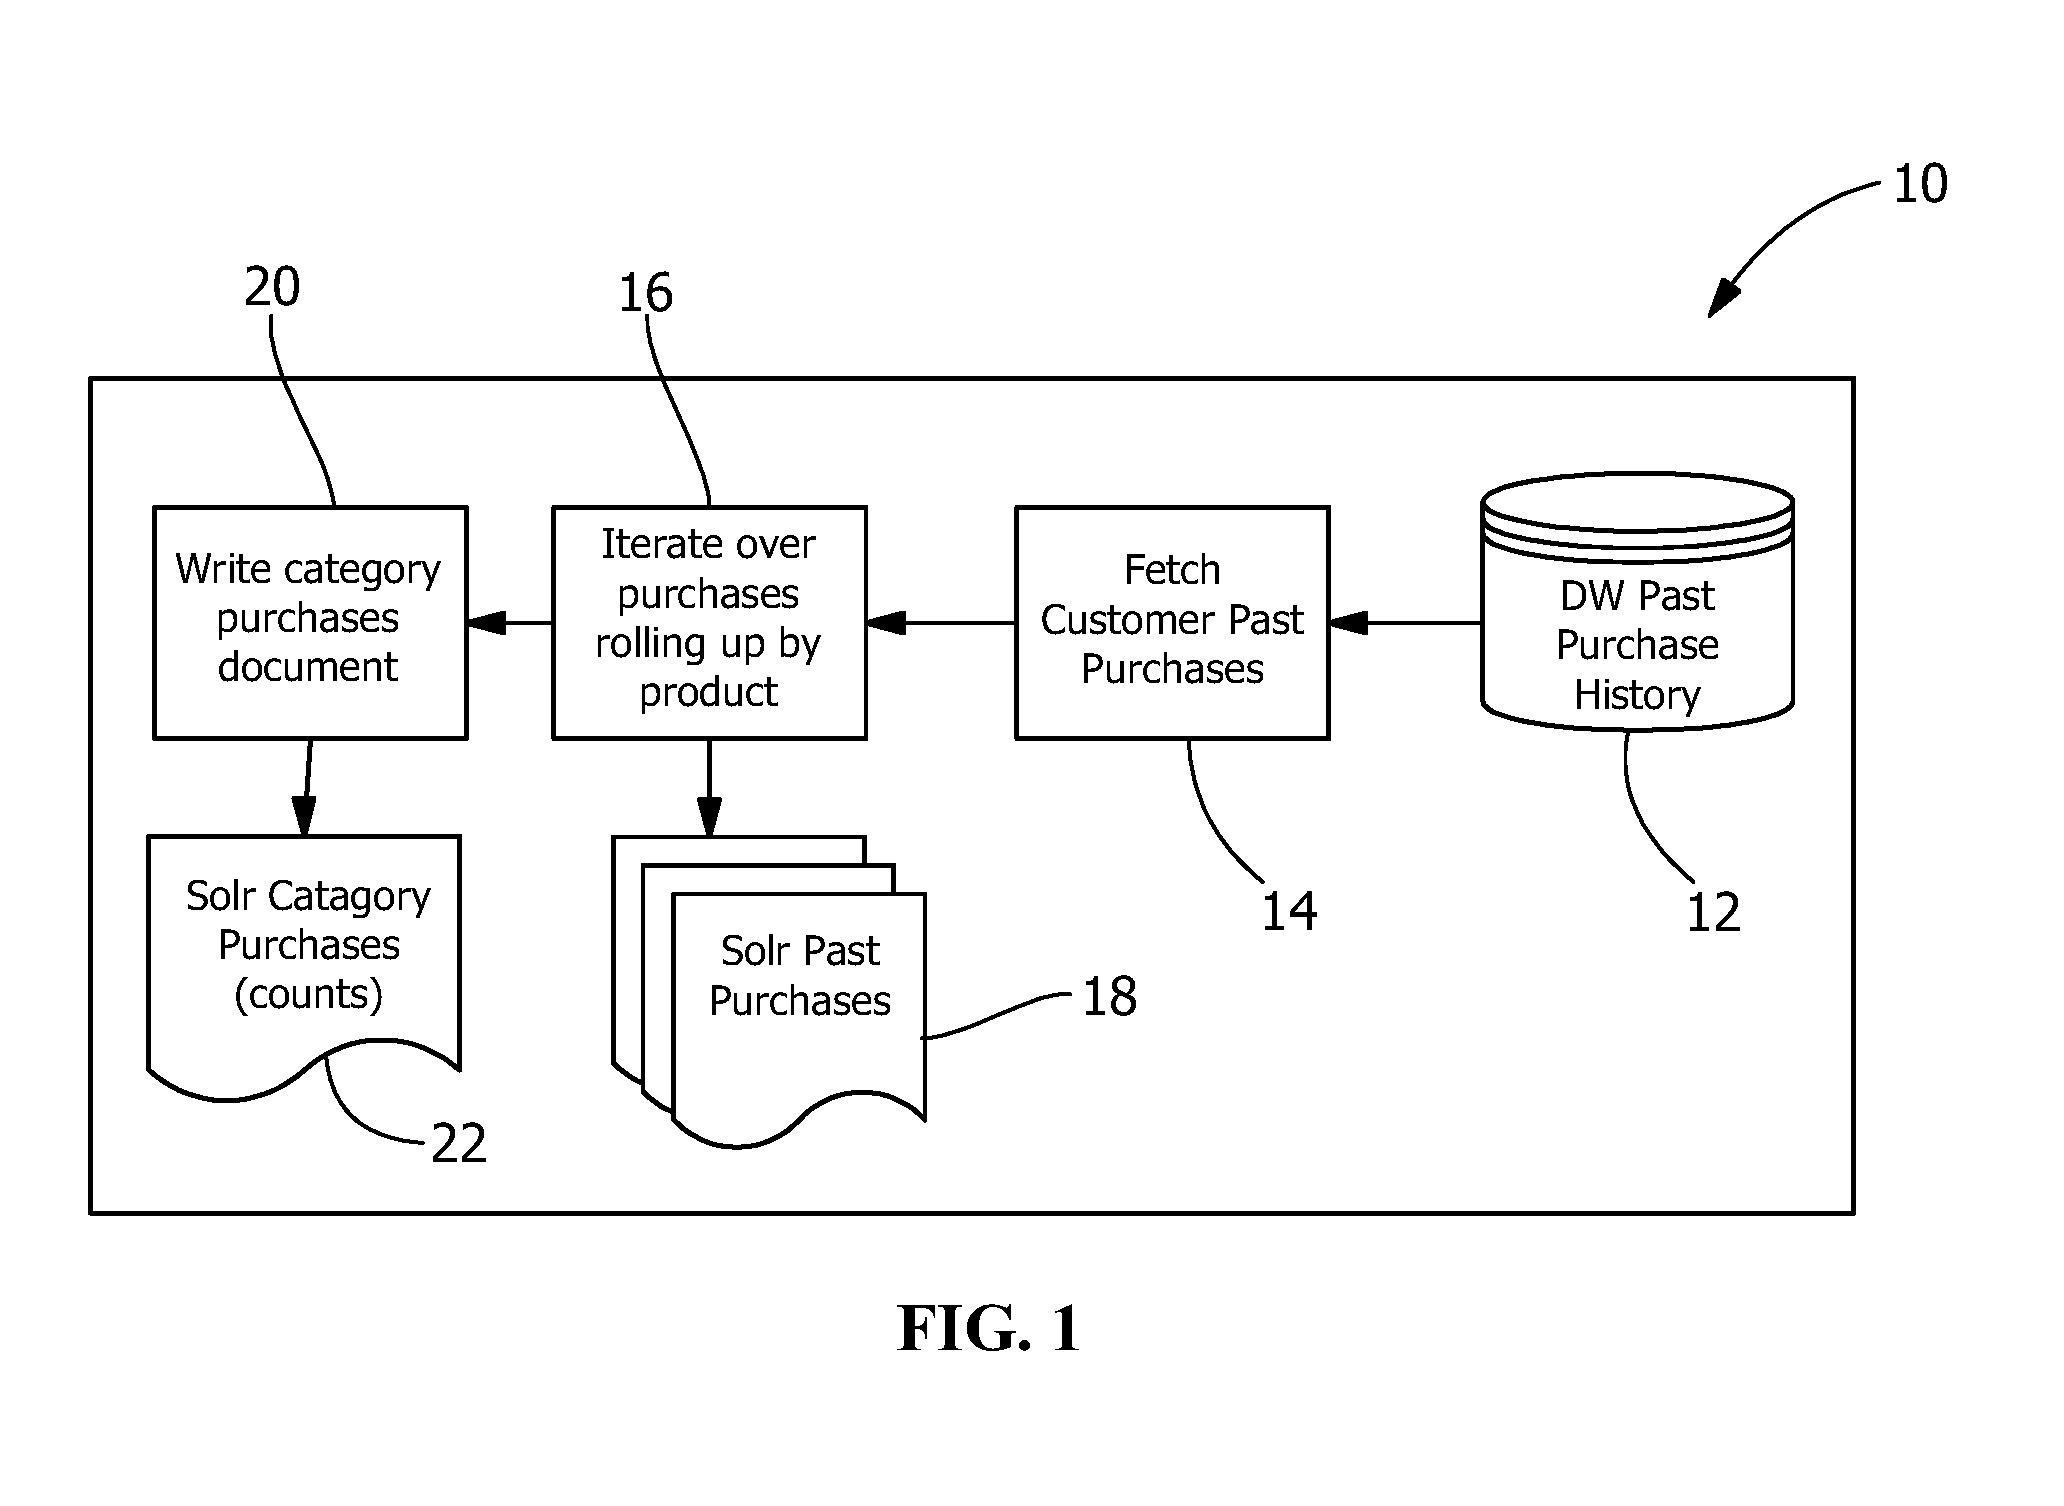 Method and system for automatically generating recommendations for a client shopping list